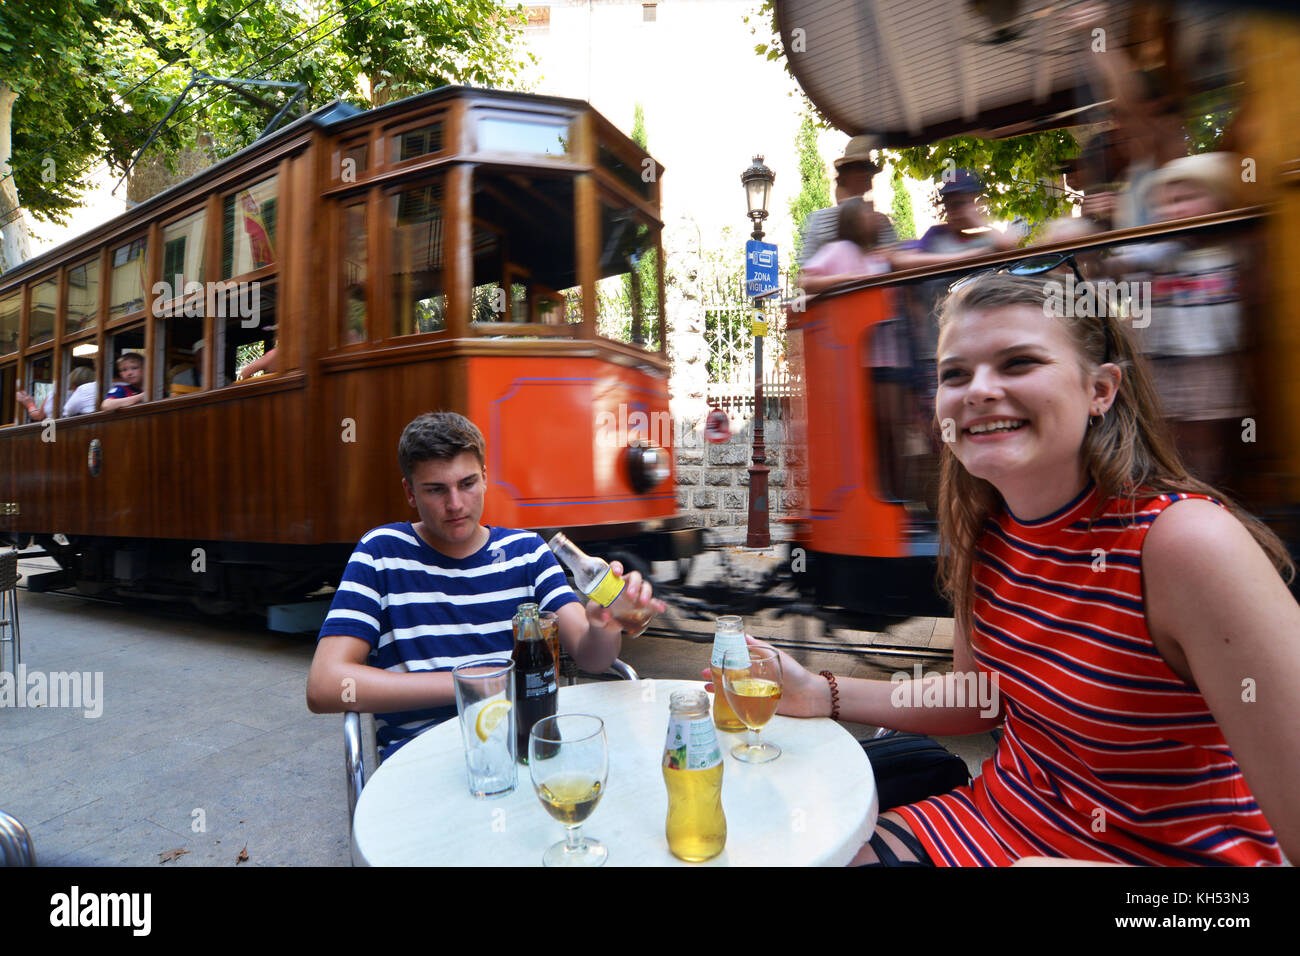 Summer drinks next to a tram on holiday in Soller, Mallorca Stock Photo